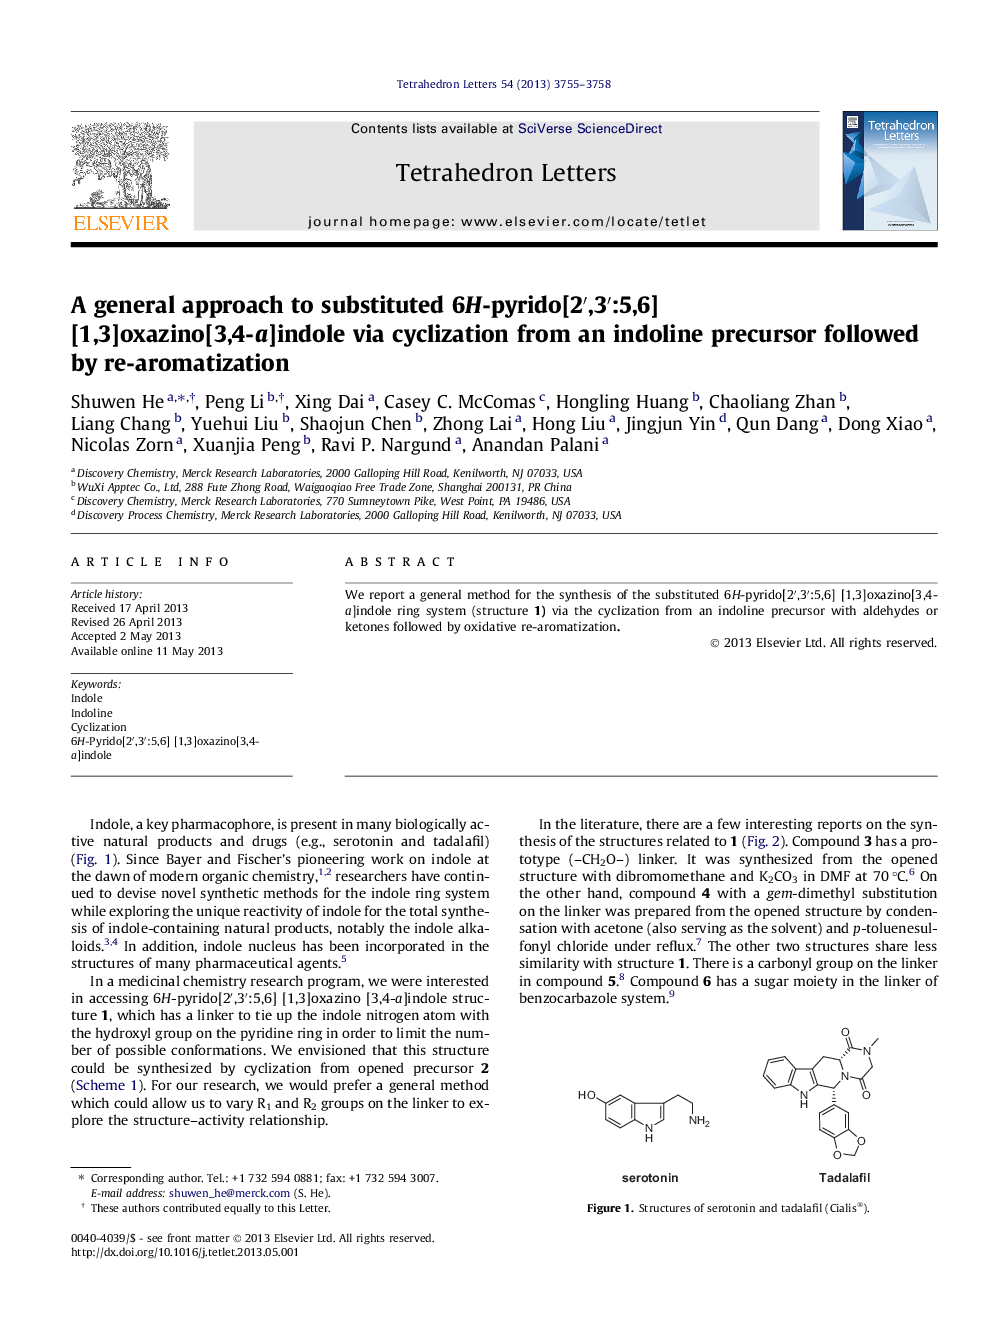 A general approach to substituted 6H-pyrido[2â²,3â²:5,6] [1,3]oxazino[3,4-a]indole via cyclization from an indoline precursor followed by re-aromatization